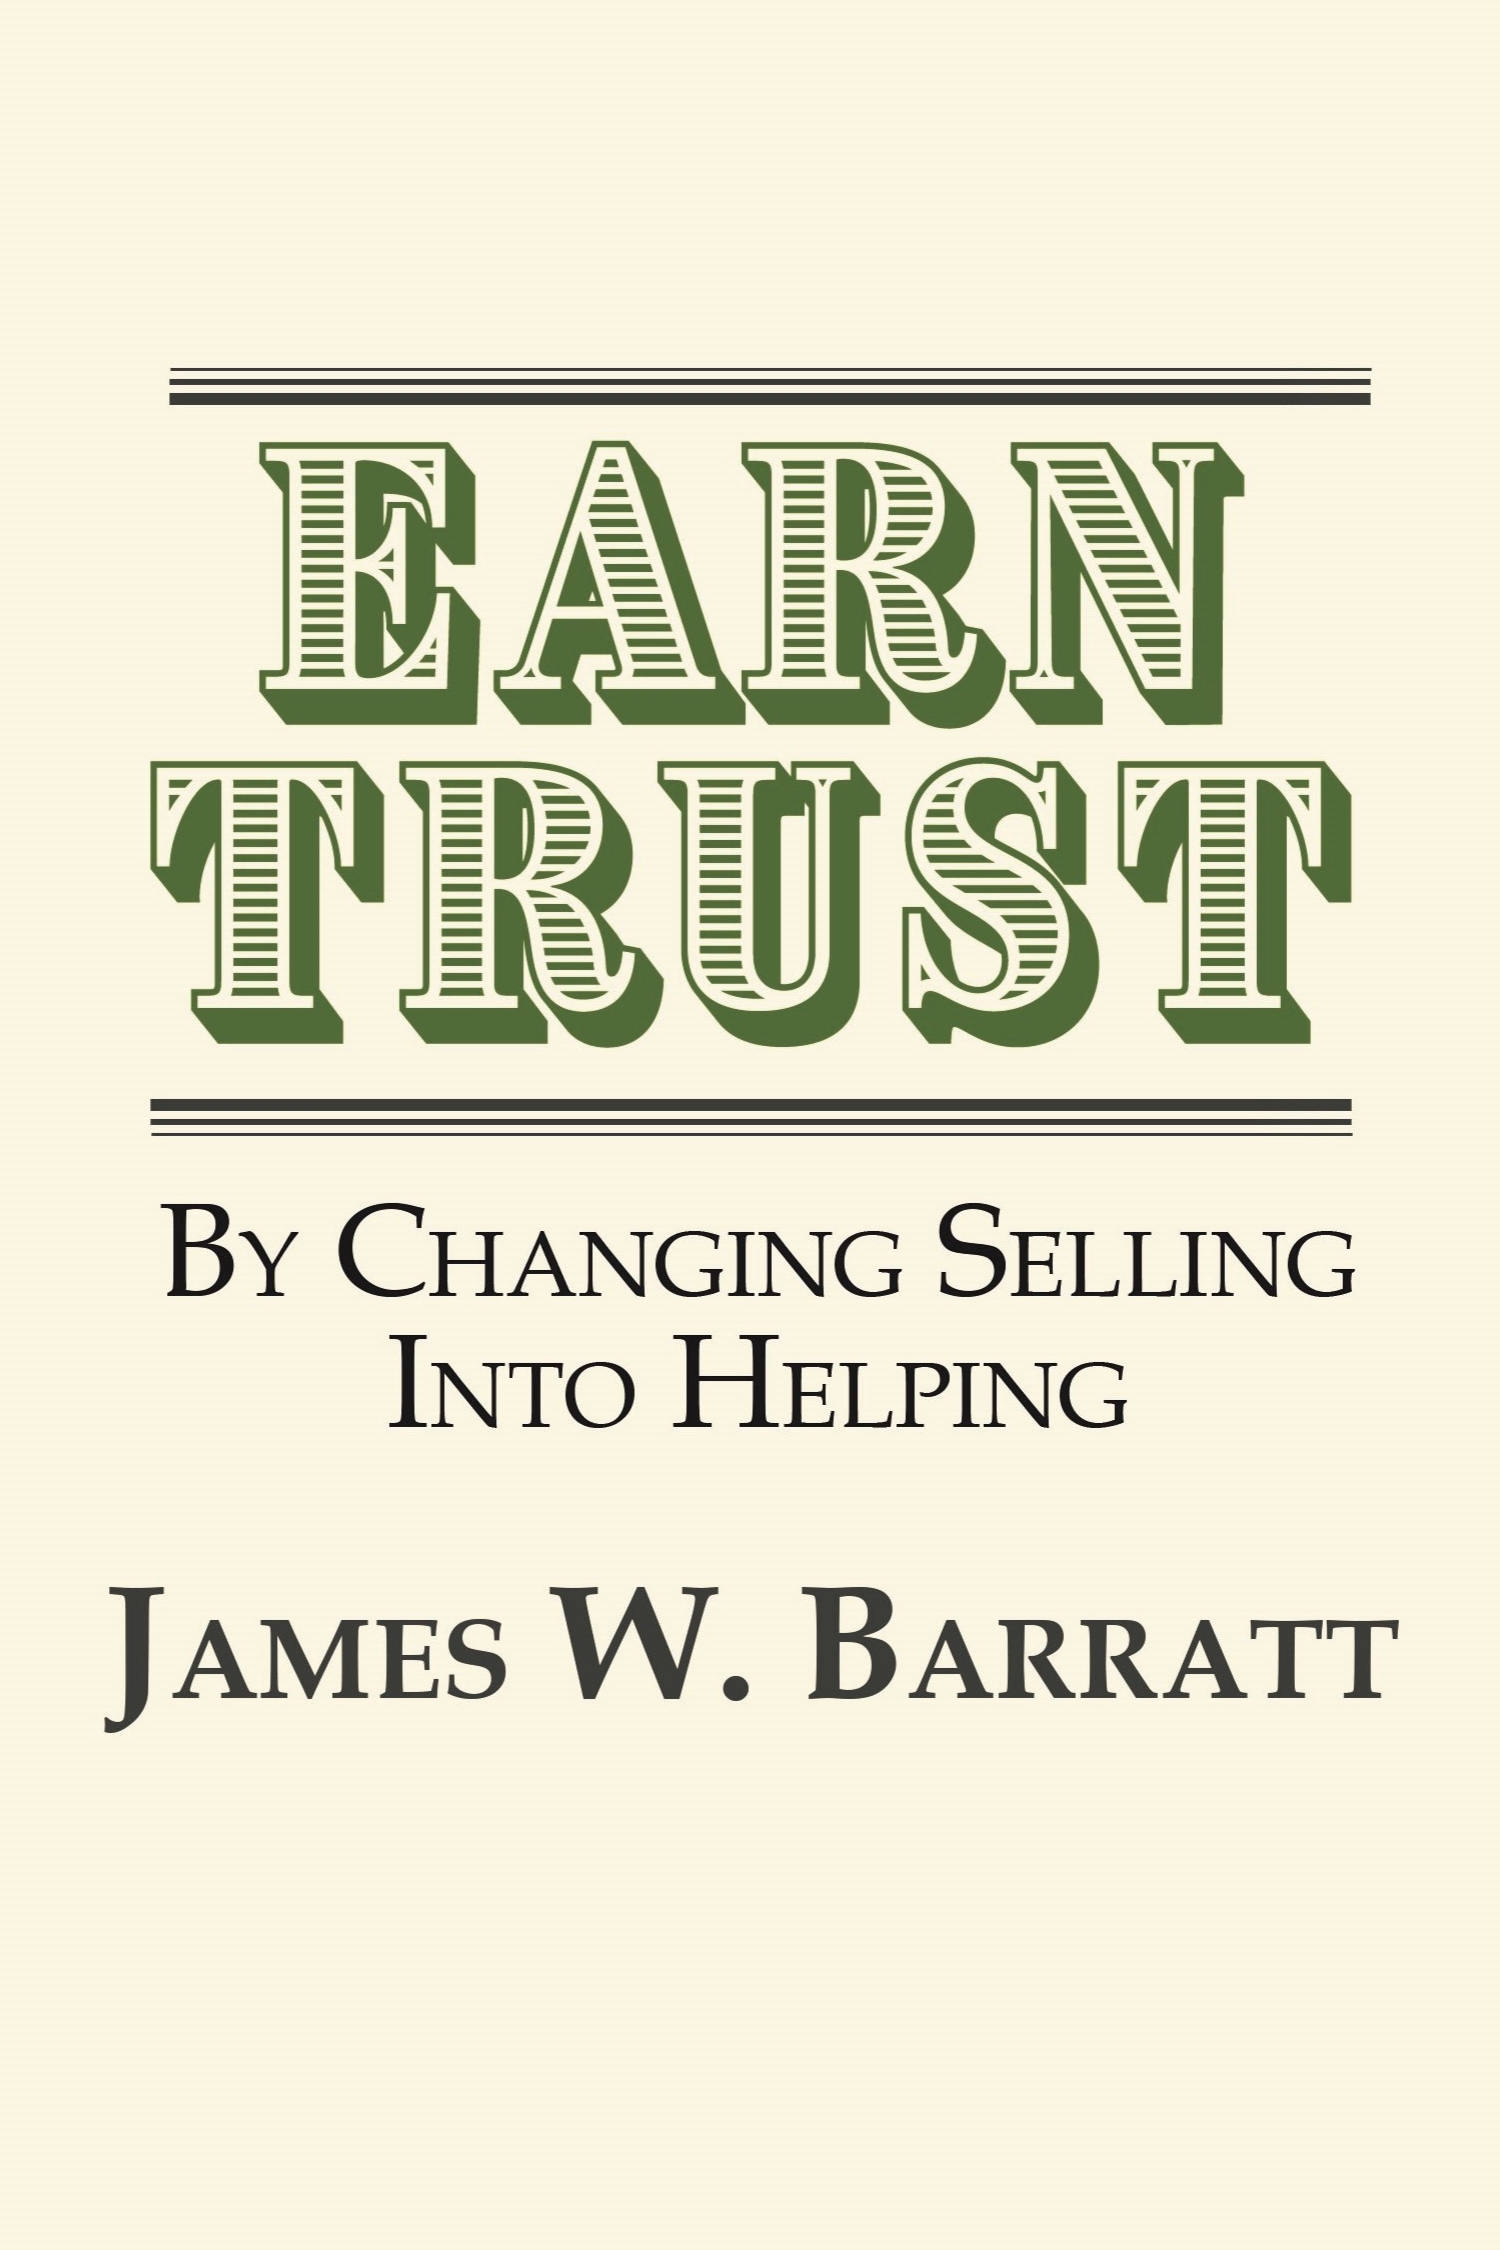 EARN TRUST By Changing Selling Into Helping